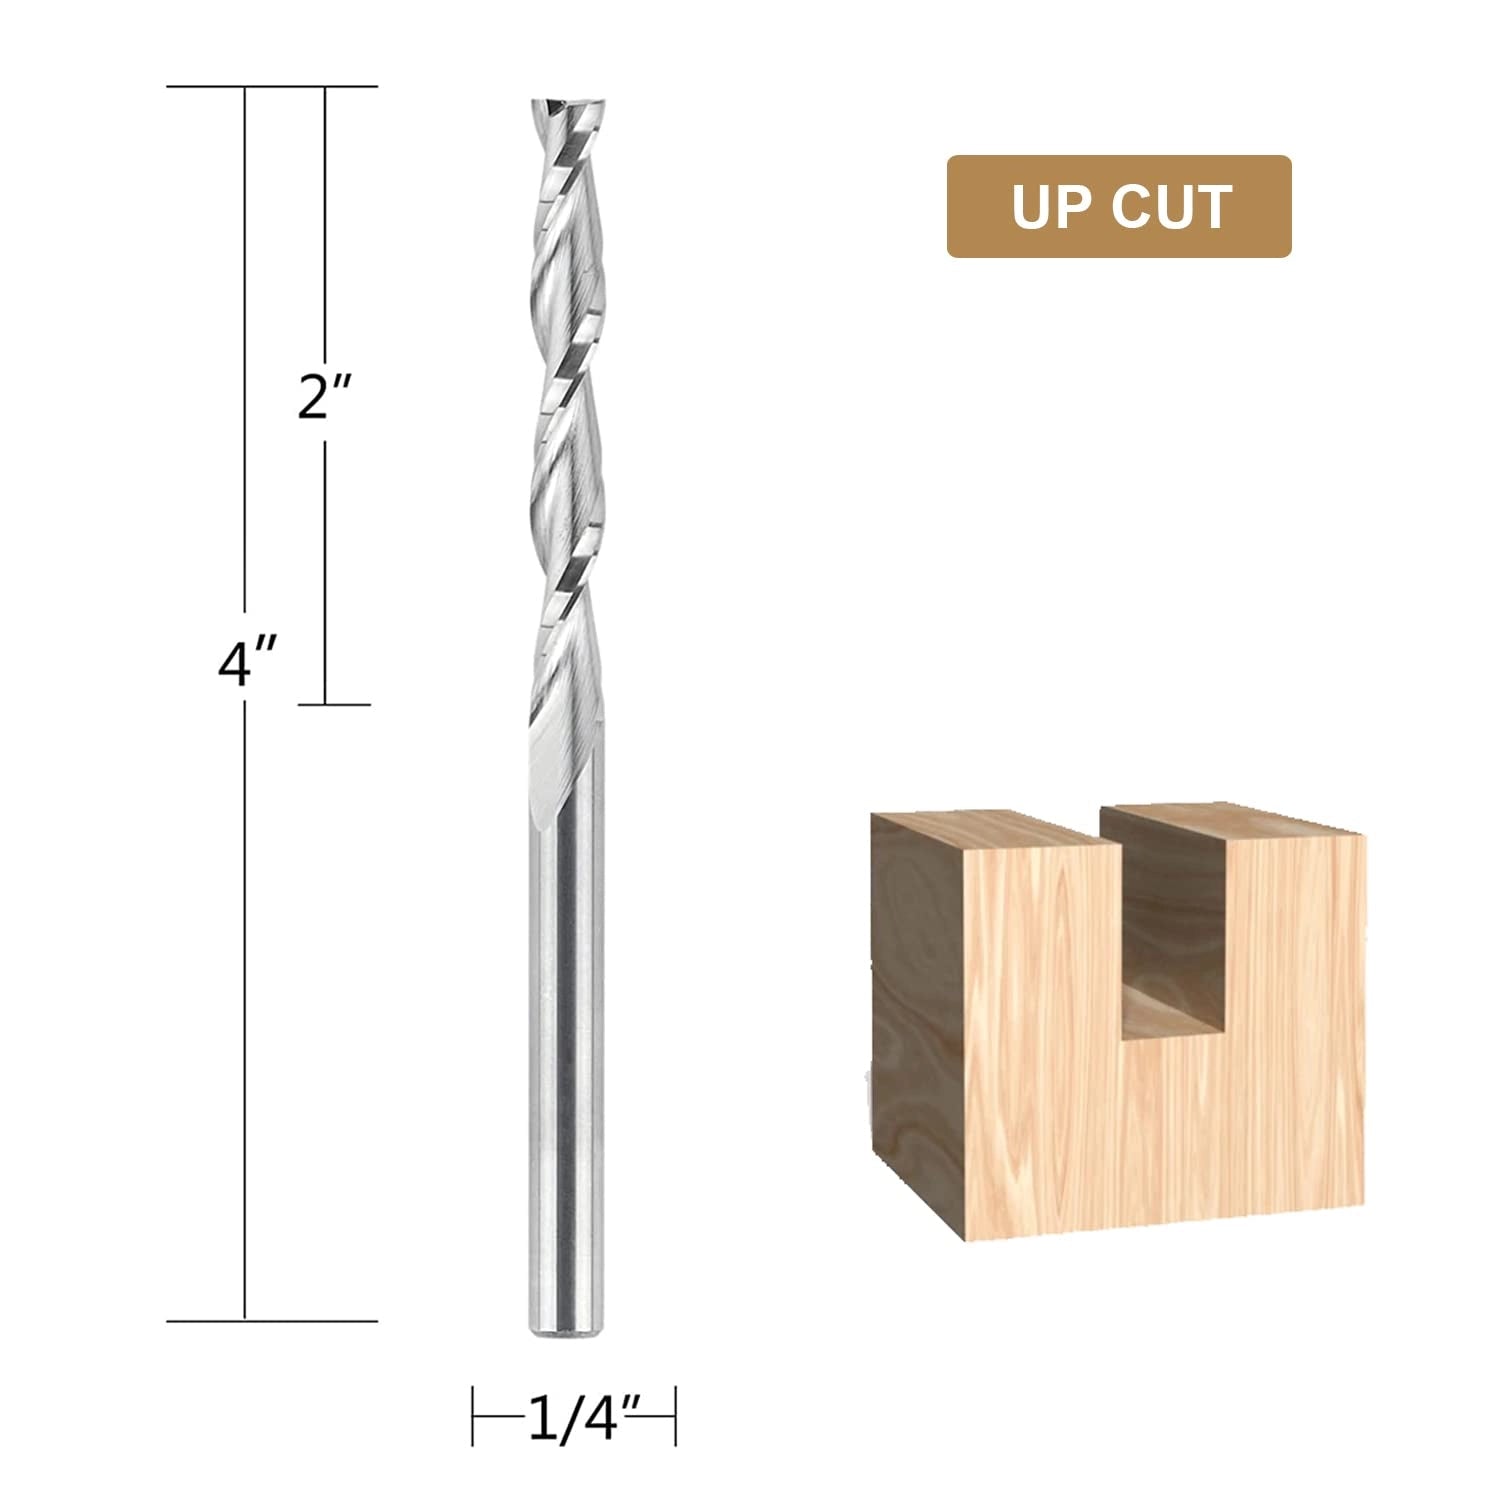 SpeTool Up Cut 1/4 Dia x 4 Inch long router bits